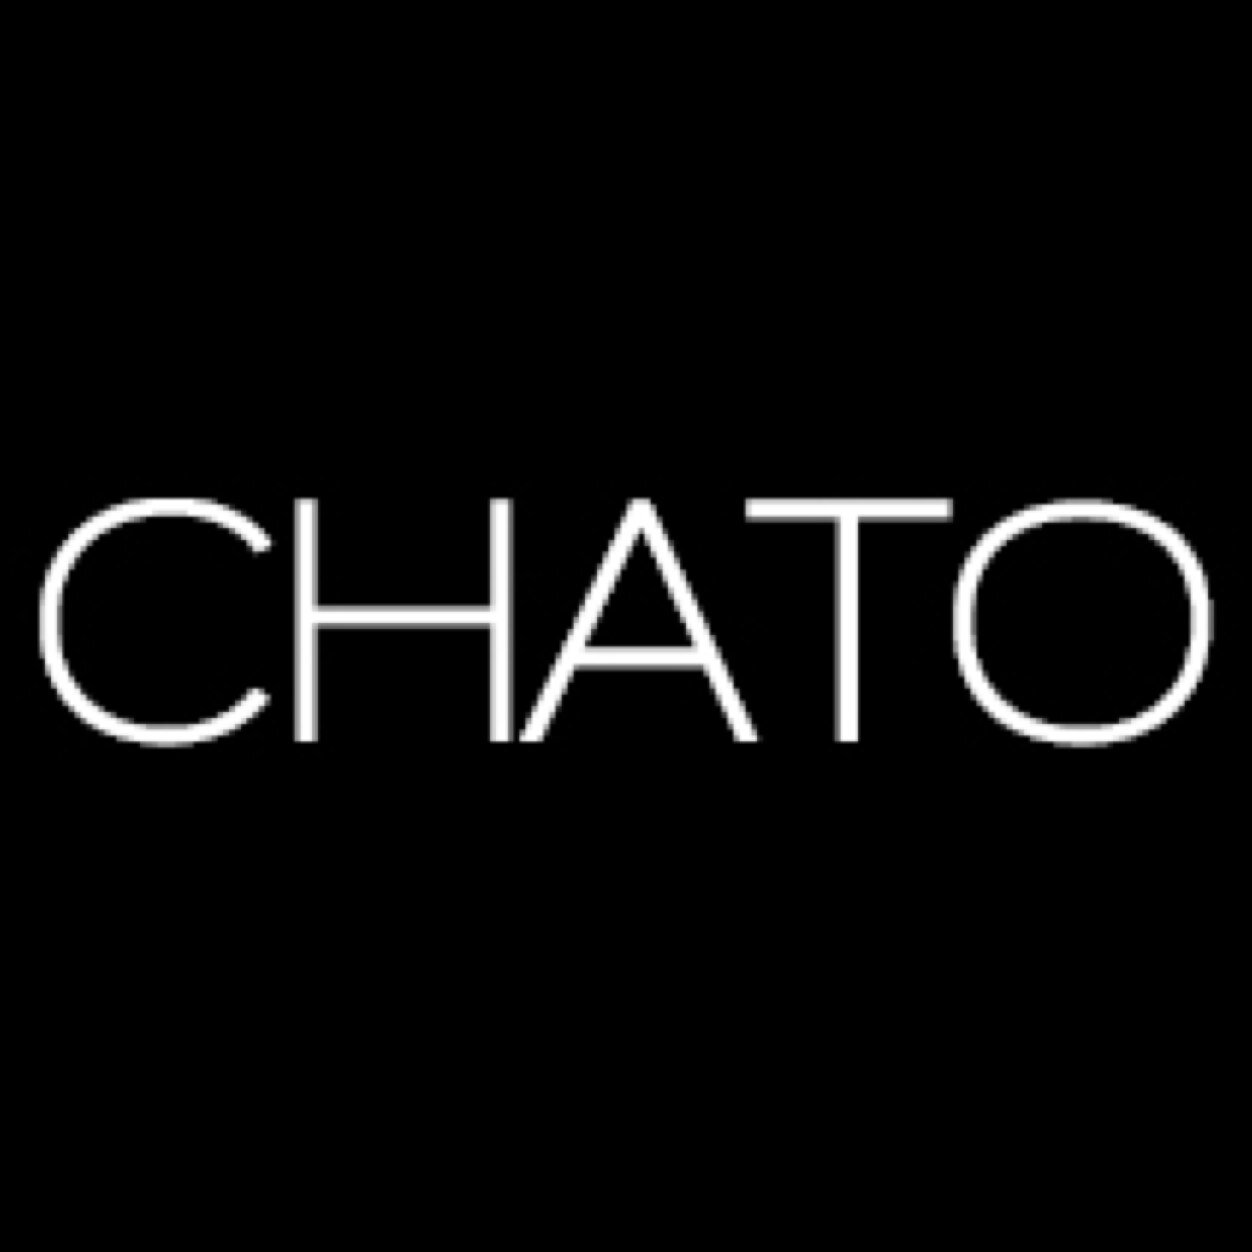 Welcome to the official twitter of CHATO boutique.

Follow us on instagram @chatoboutique